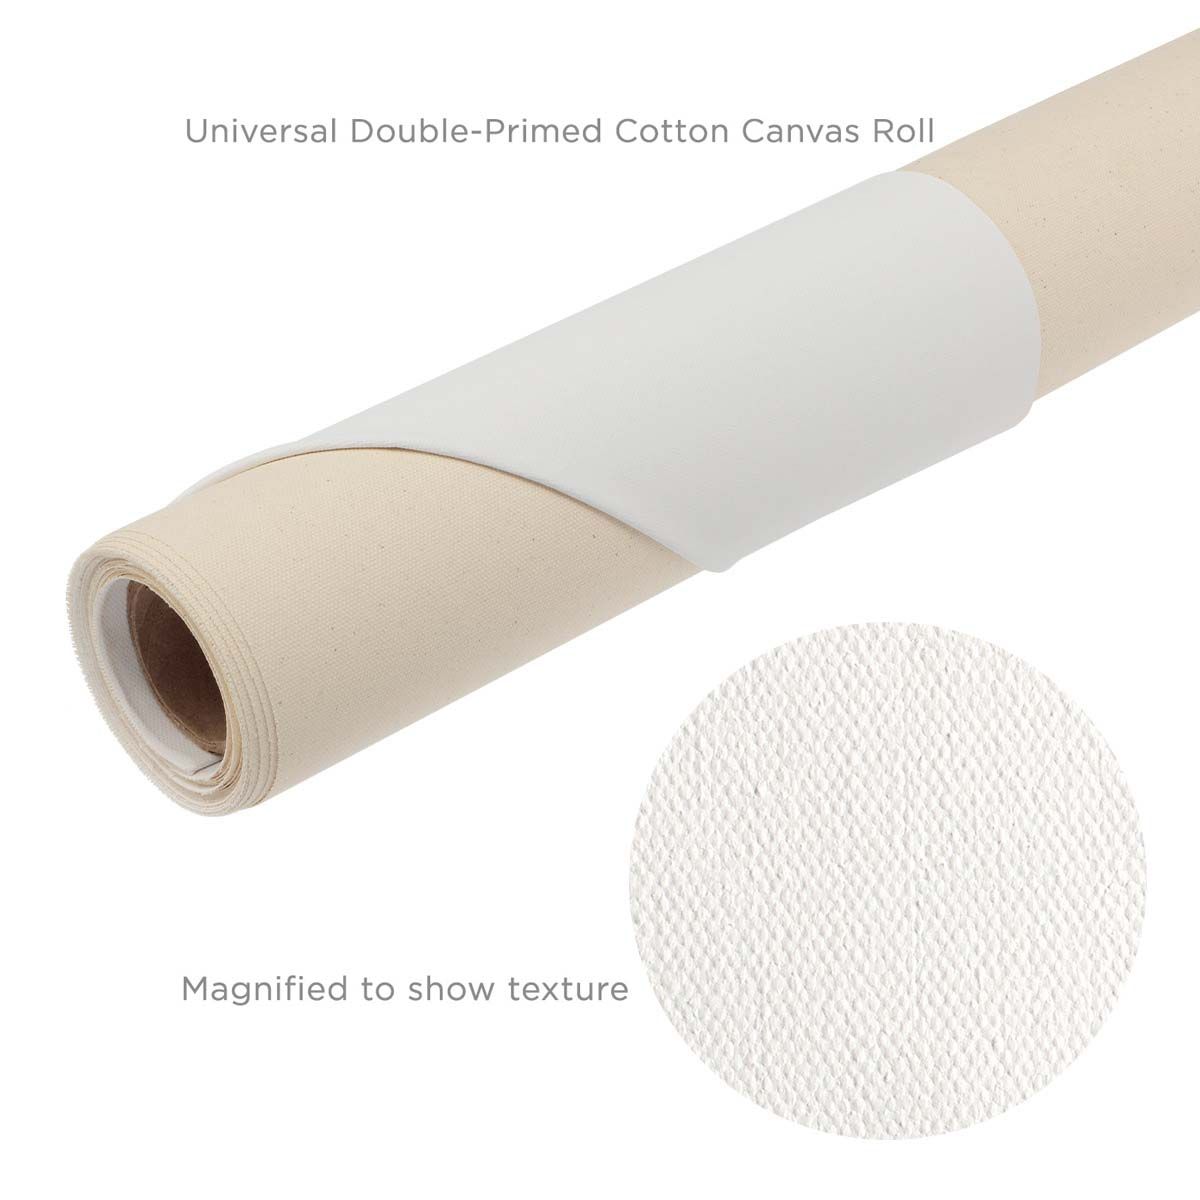 320g triple primed unbleached 100% Cotton Canvas Roll With Medium